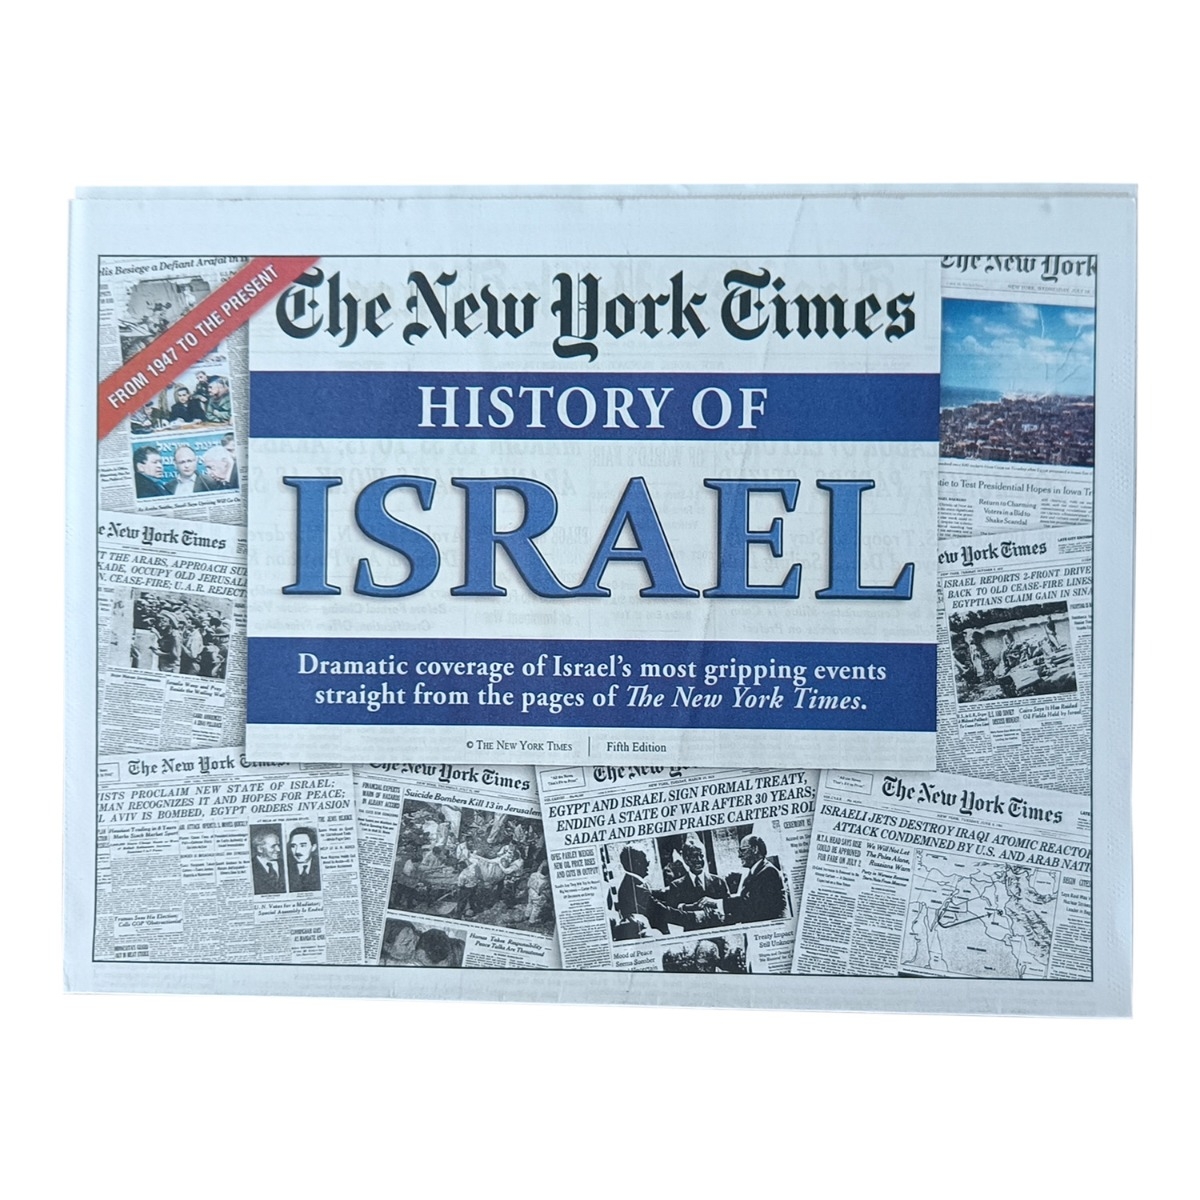 New York Times Reprint - The History of the State of Israel (16 Pages) - 1